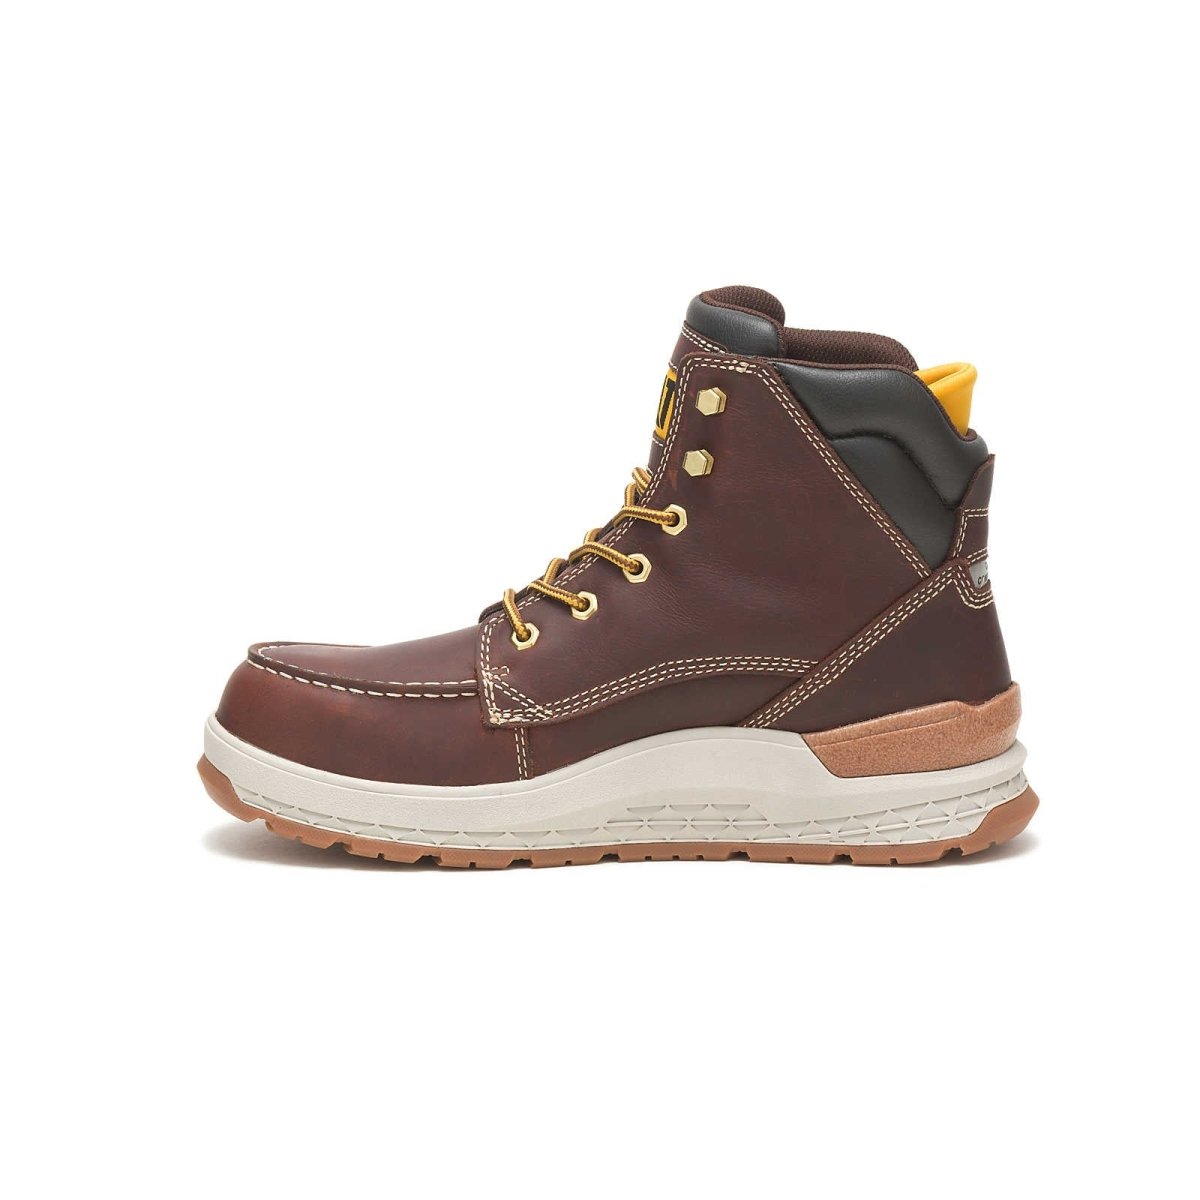 CATERPILLAR IMPACT (P91402) WATERPROOF CARBON COMPOSITE TOE MEN'S WORK BOOT IN FRIAR BROWN - TLW Shoes